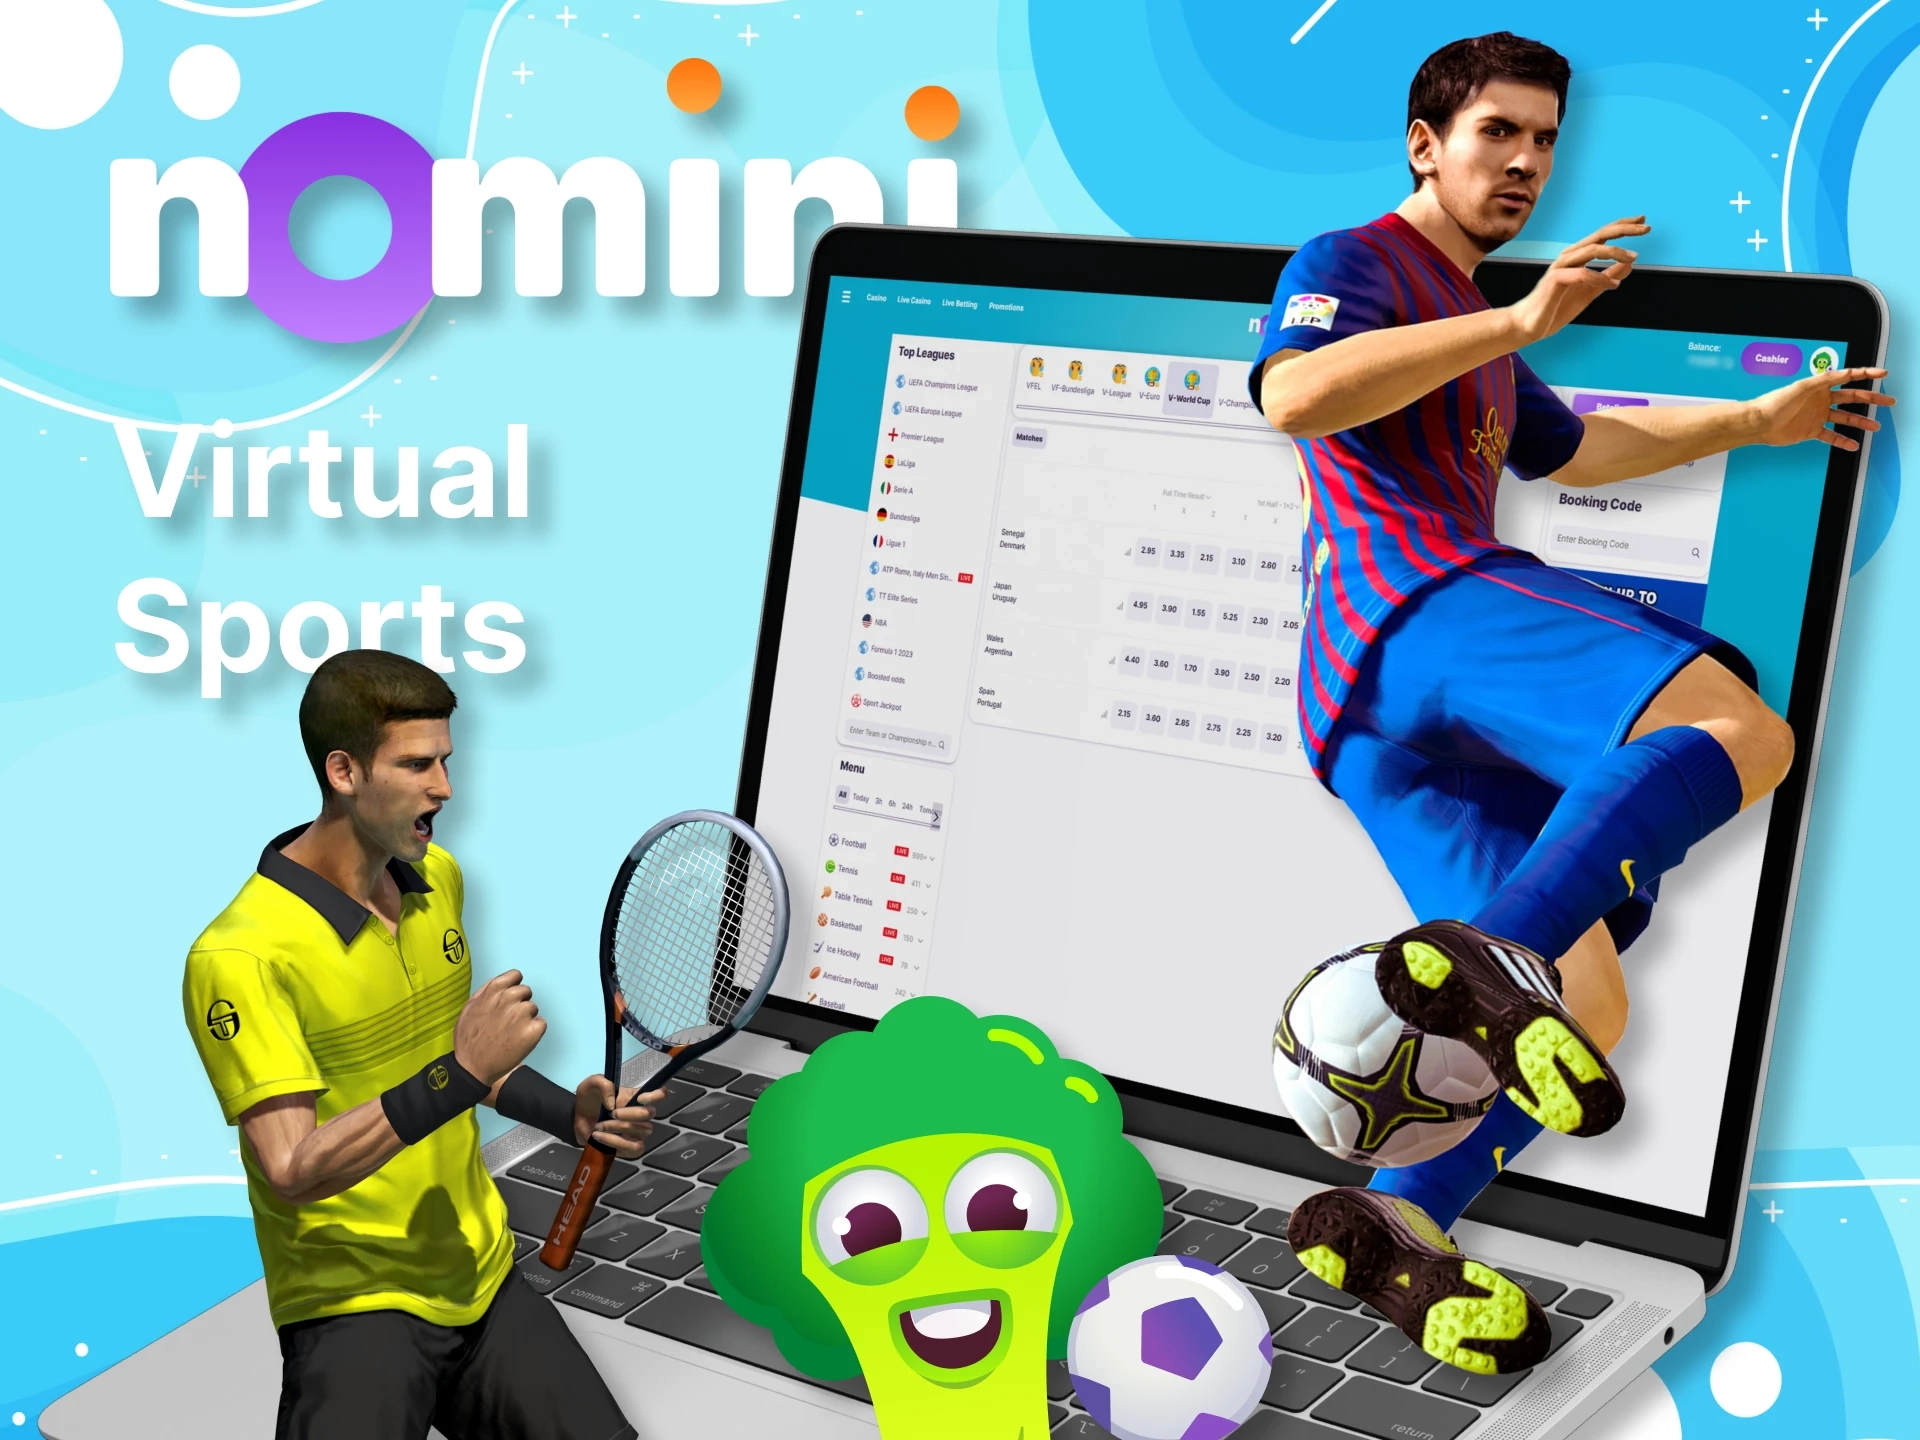 In Nomini, you can bet on virtual sports as well.